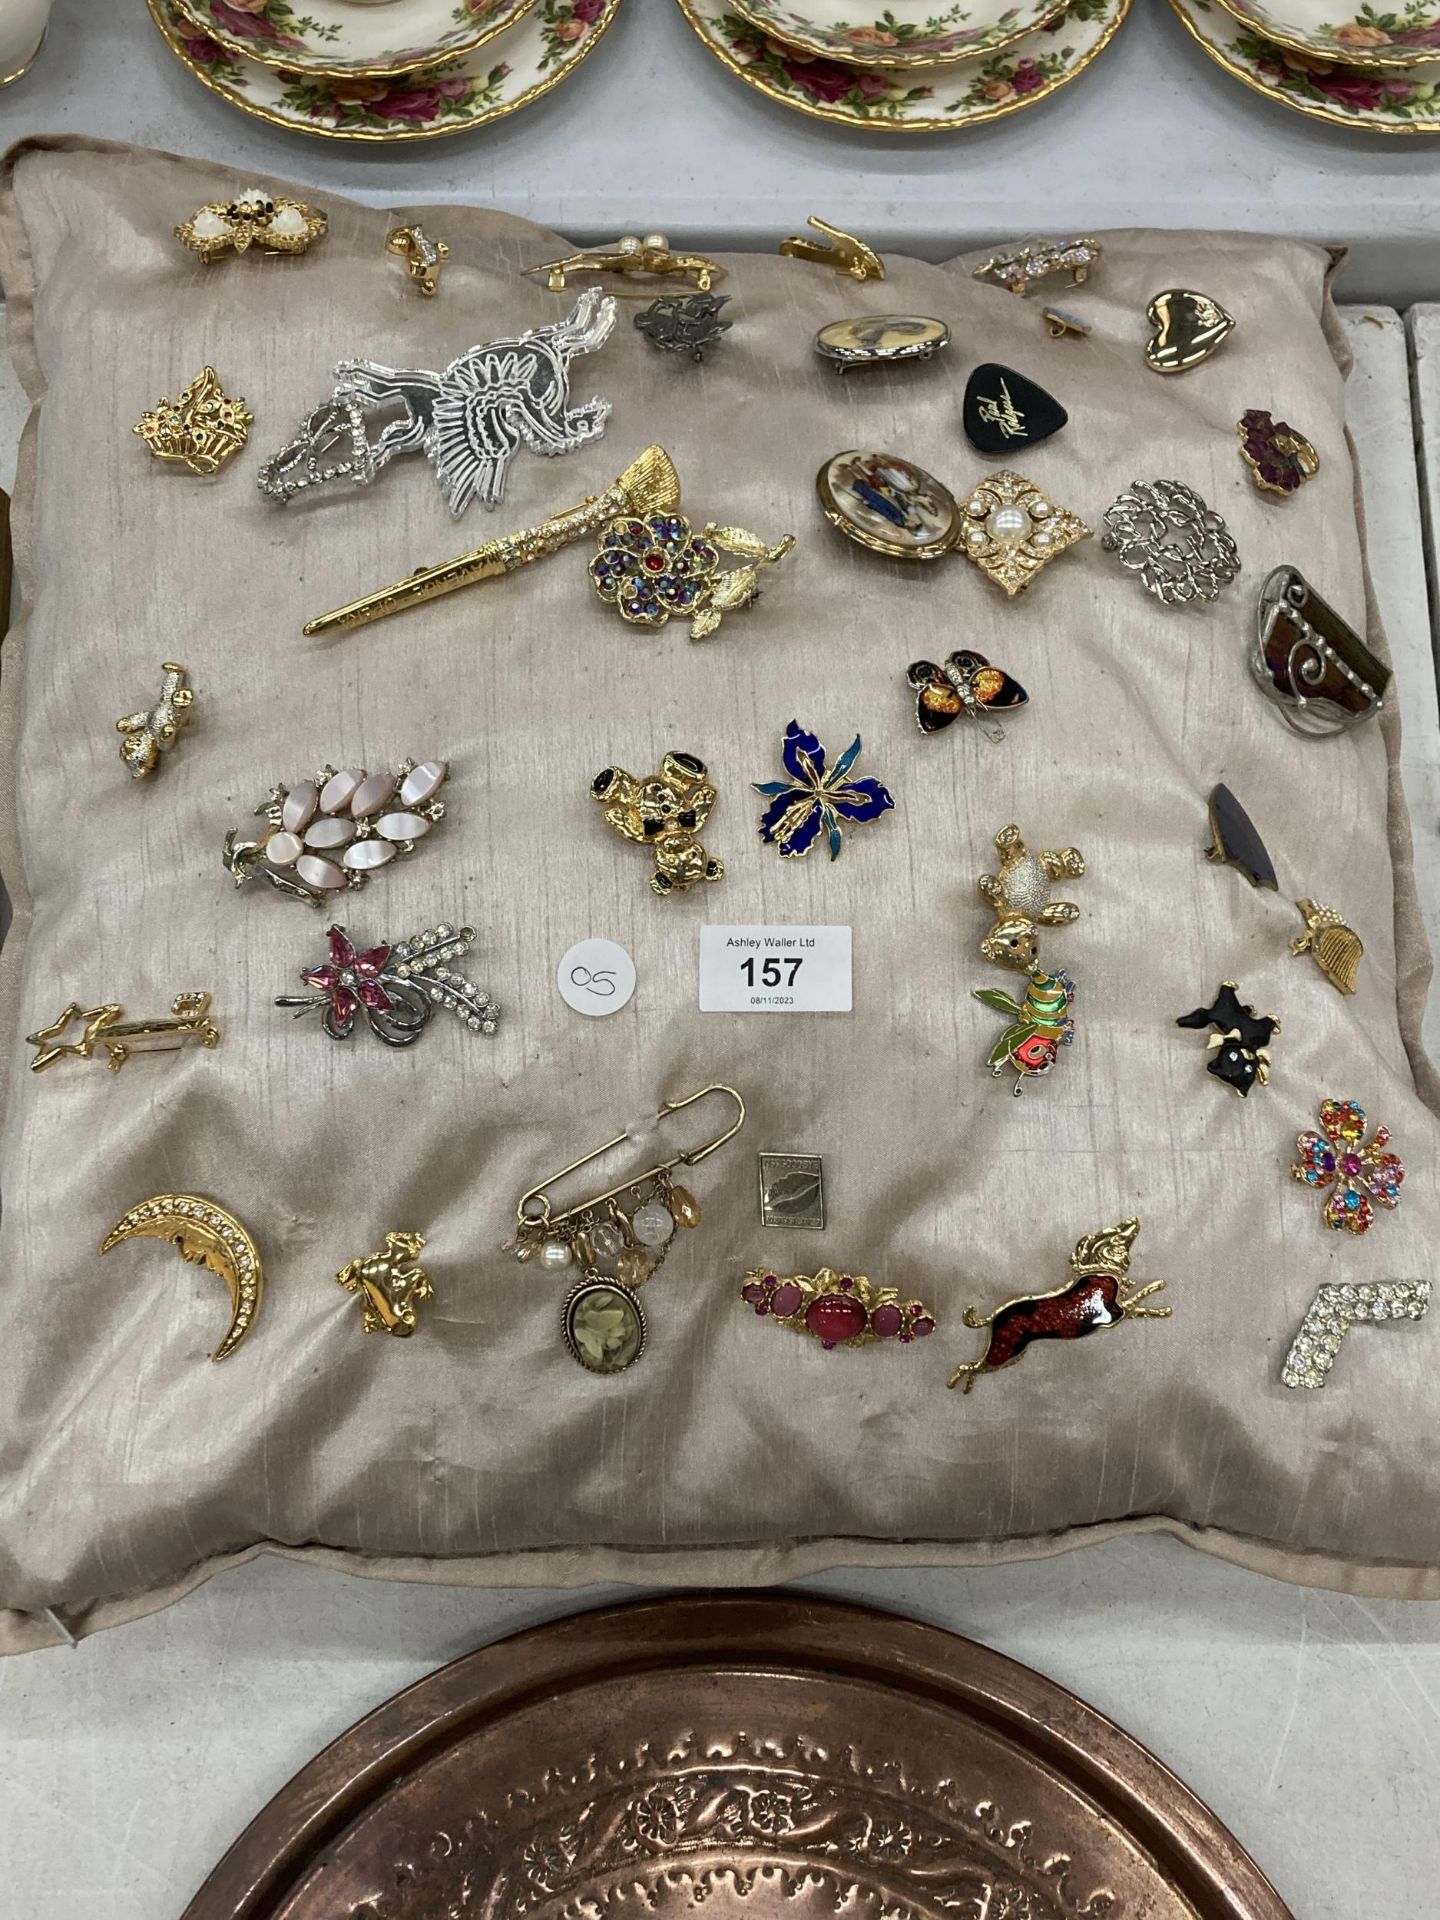 A CUSHION CONTAINING 40 COSTUME JEWELLERY BROOCHES